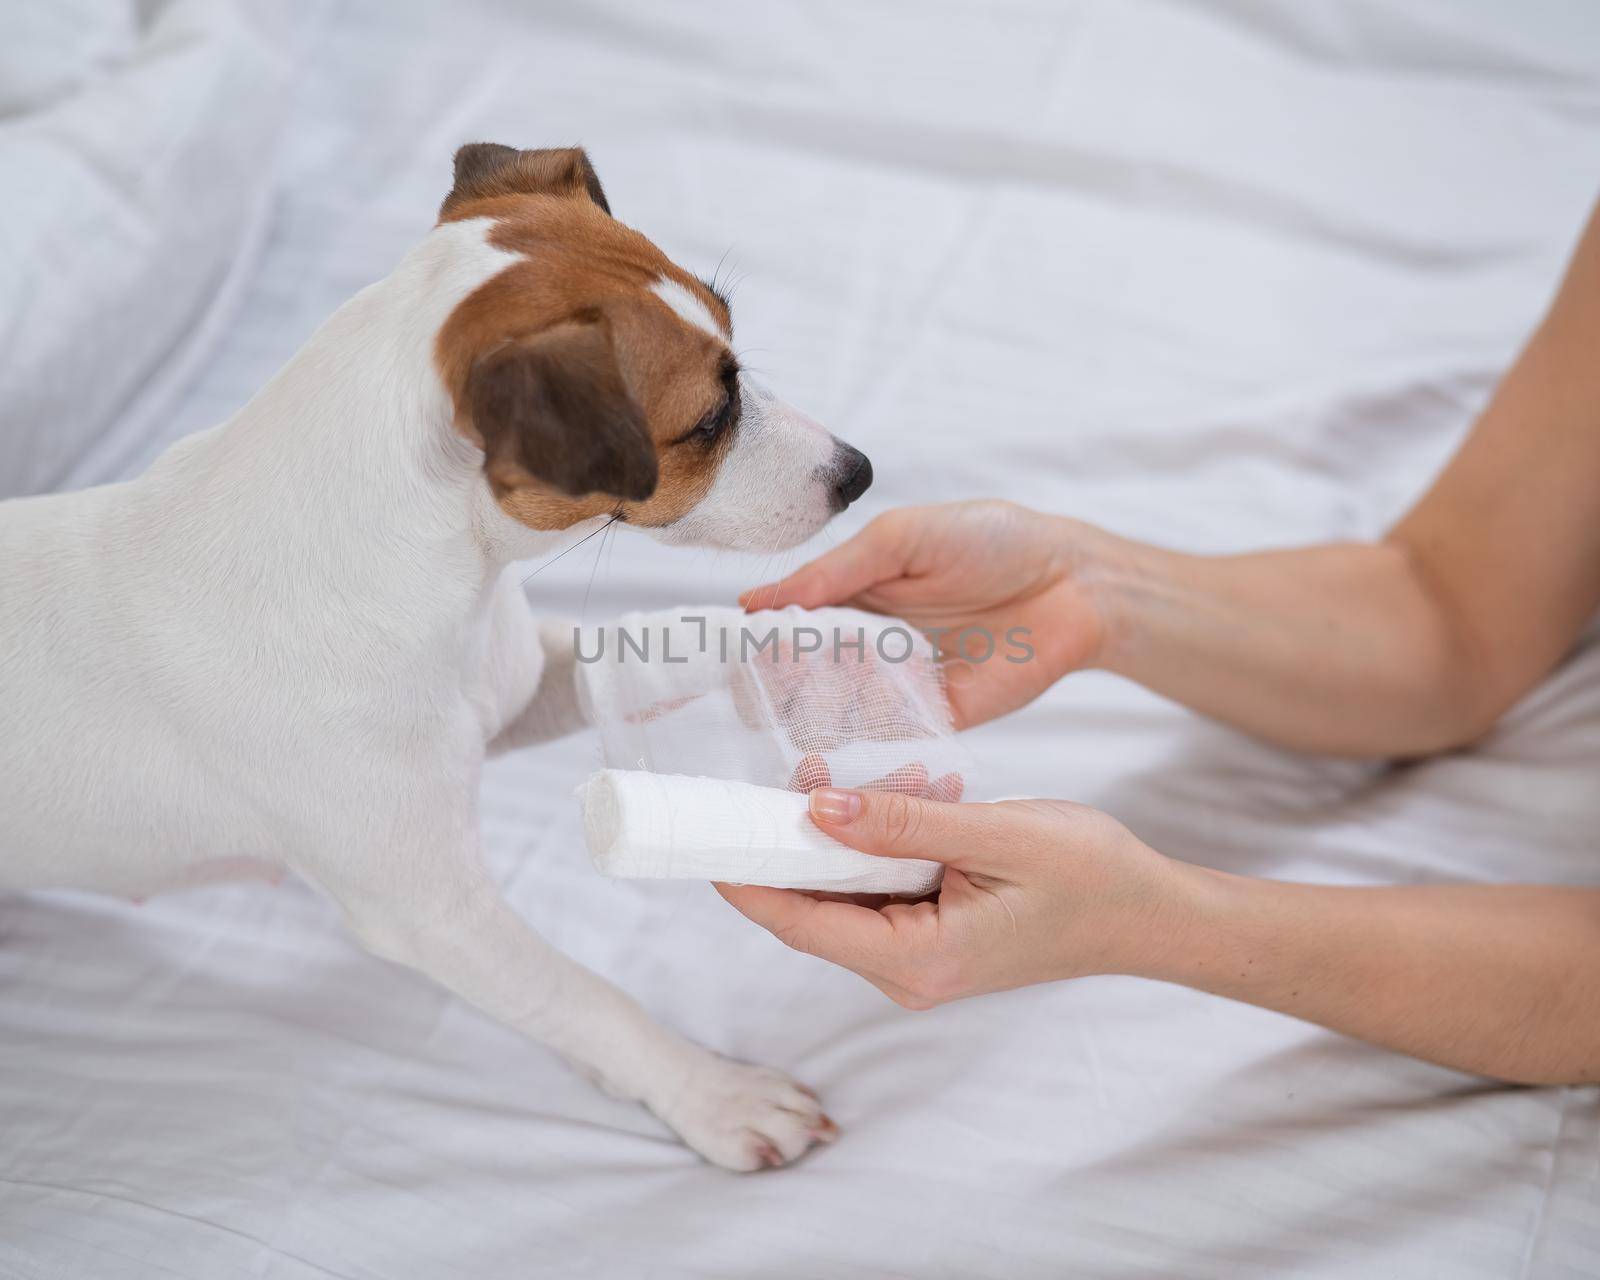 Veterinarian bandaging the paw of a Jack Russell Terrier dog